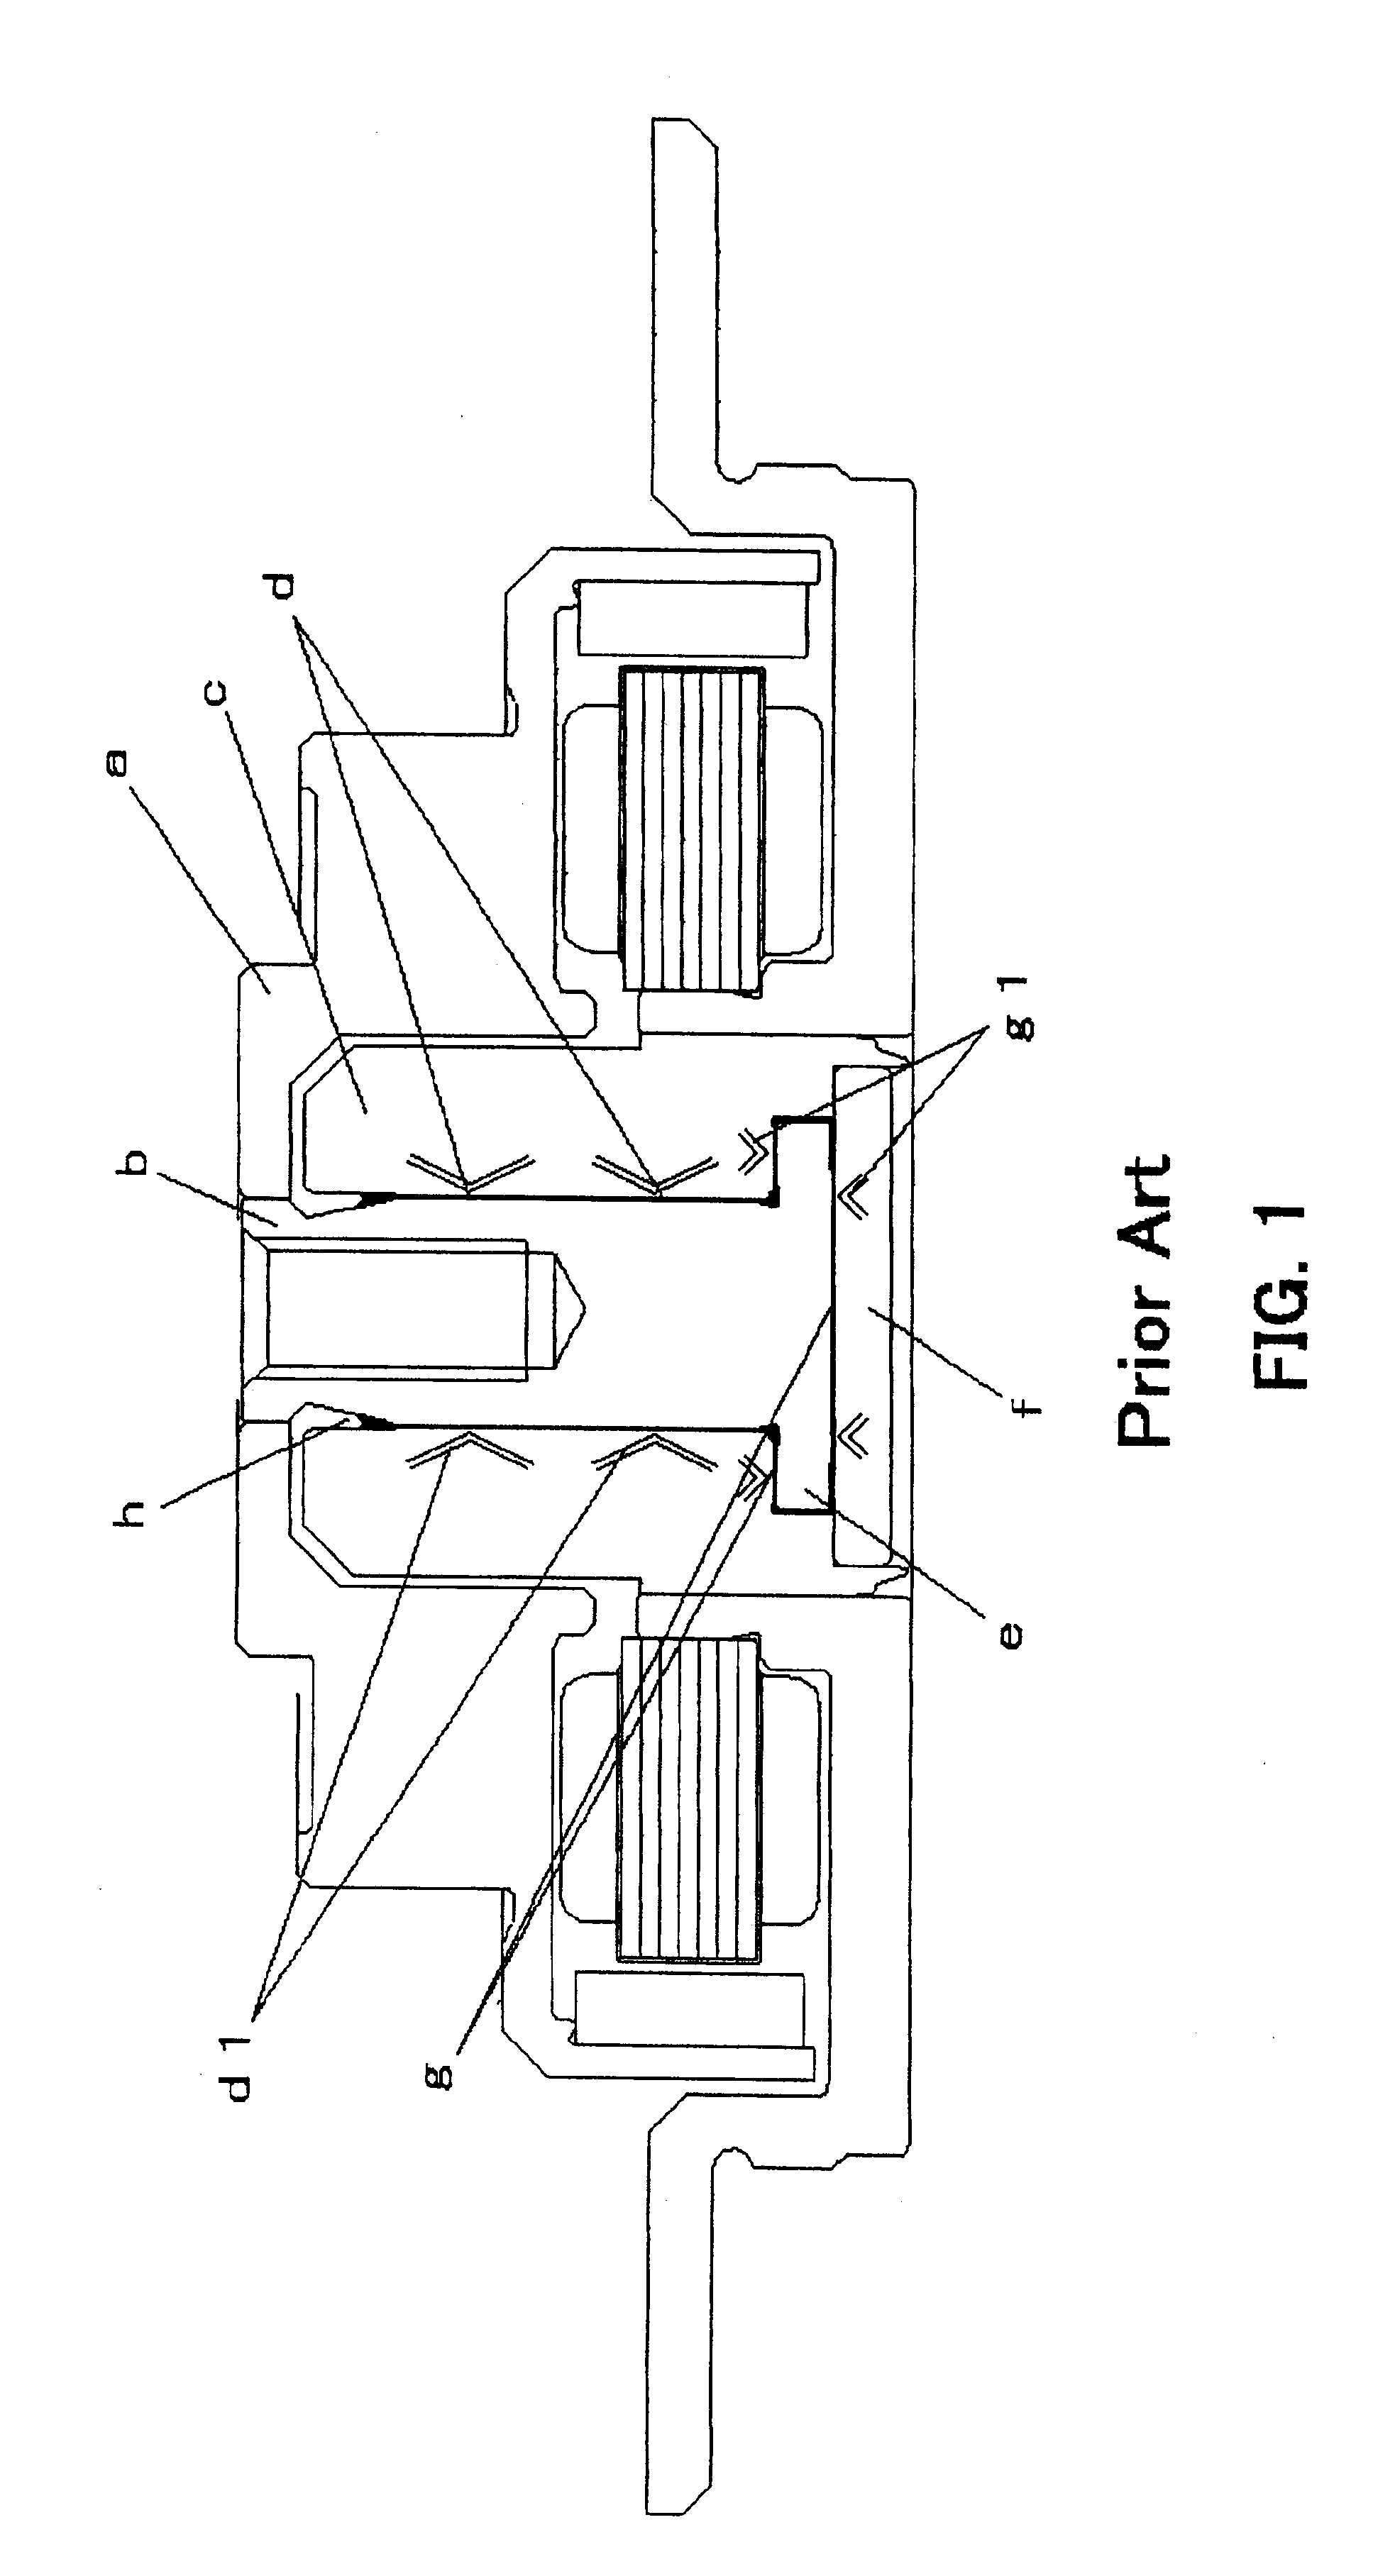 Disk drive spindle motor with radial inward thrust area annular protruding portion and bearing member communicating passage